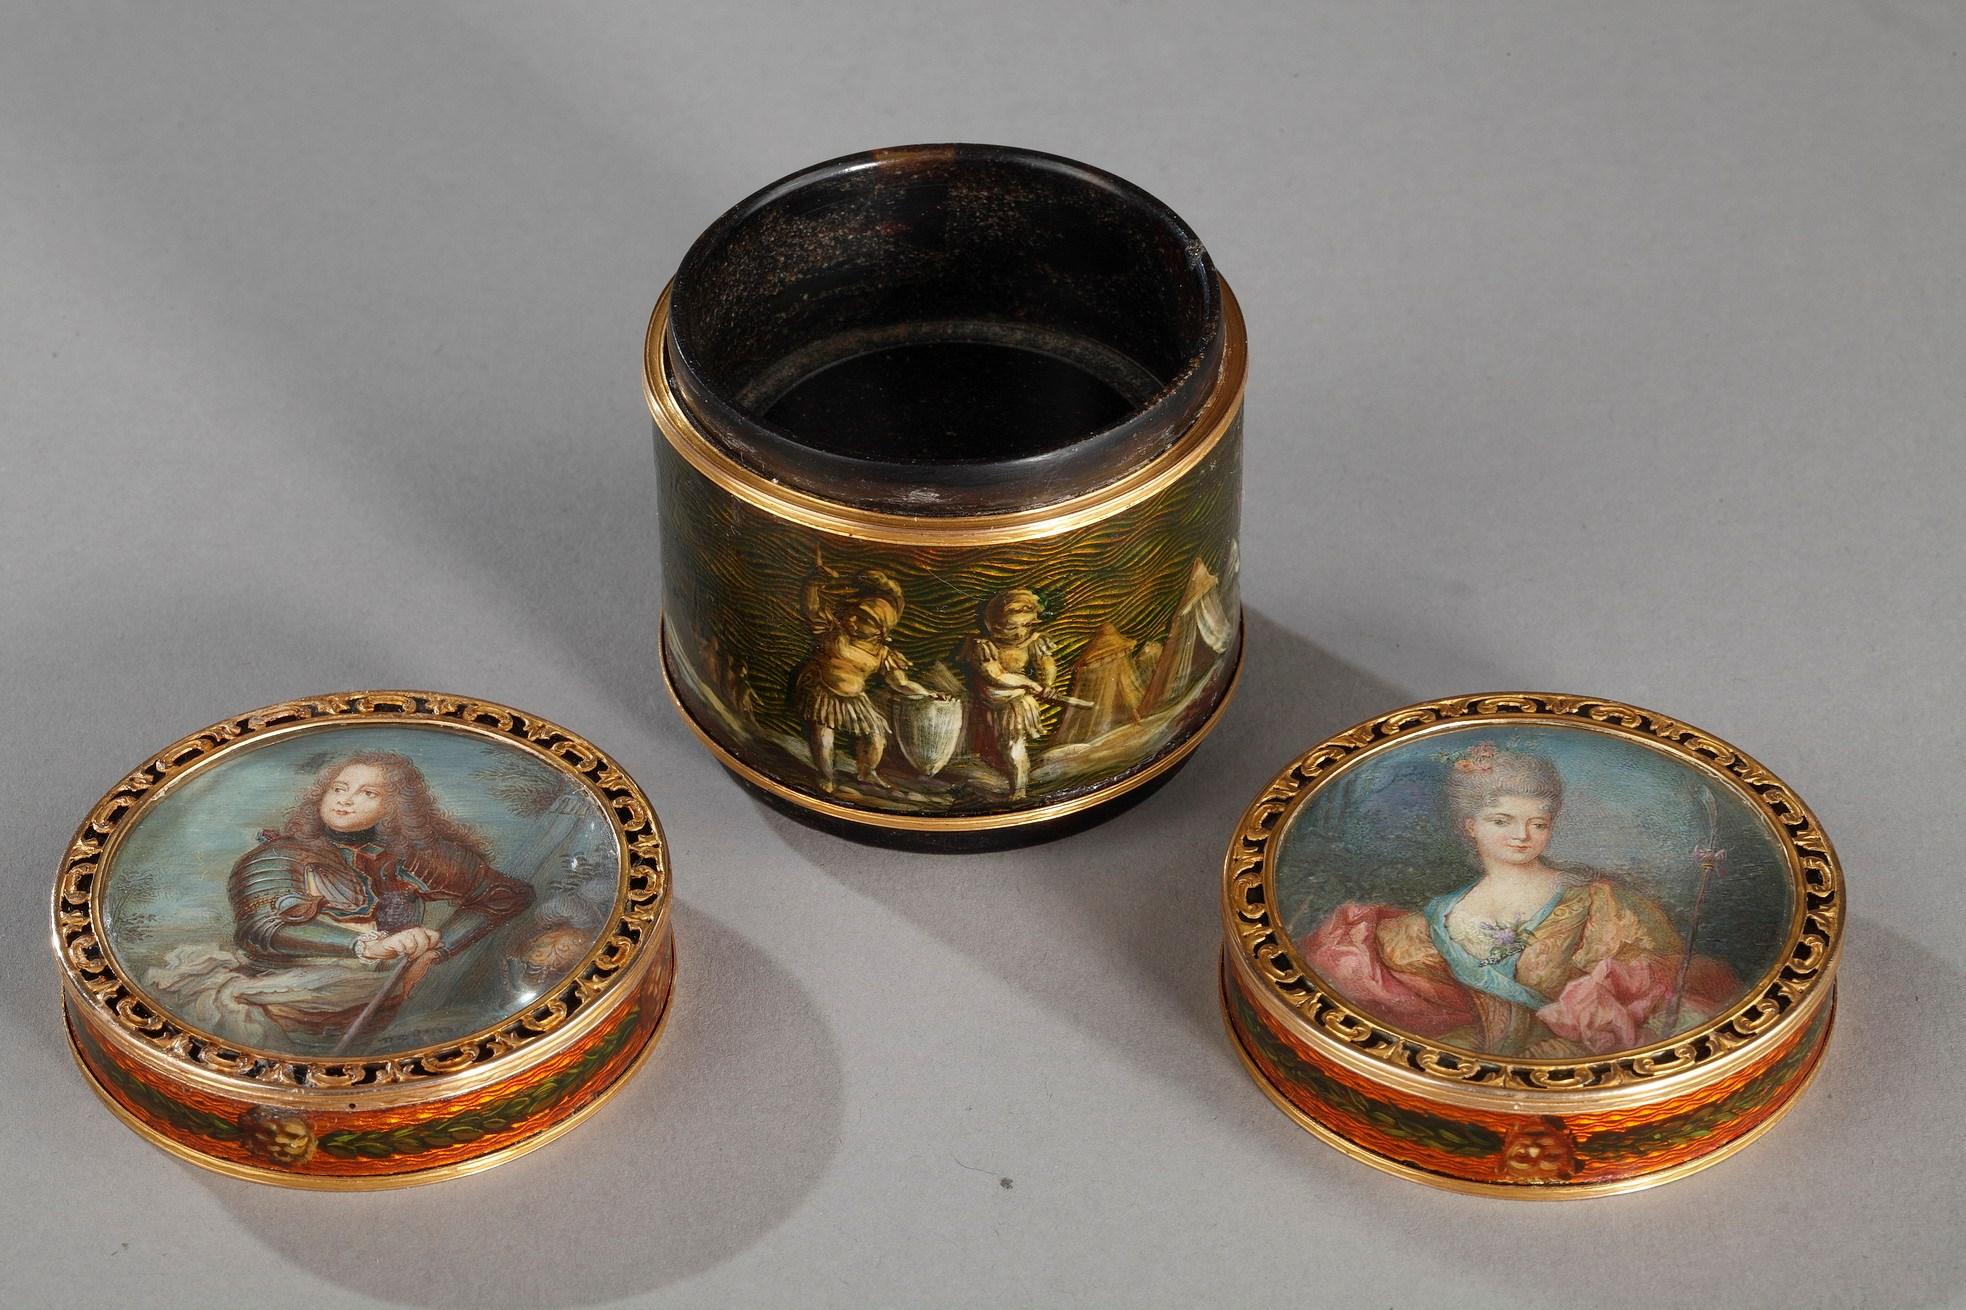 Hand-Painted 18th Century Box Martin Varnish and Gold Mount Signed Bardin